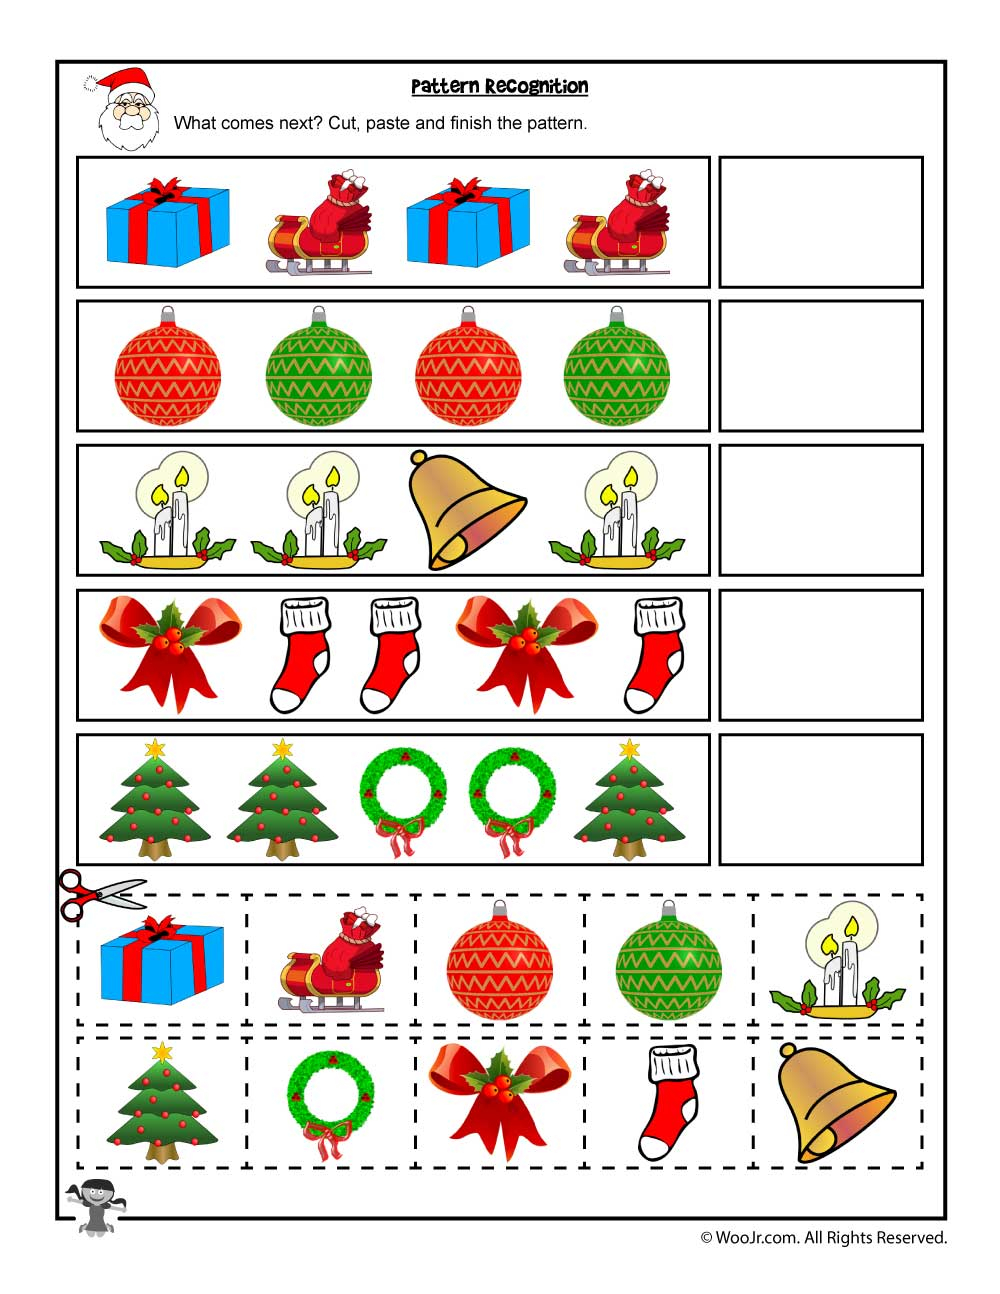 free-printable-cut-and-paste-pattern-worksheets-printable-templates